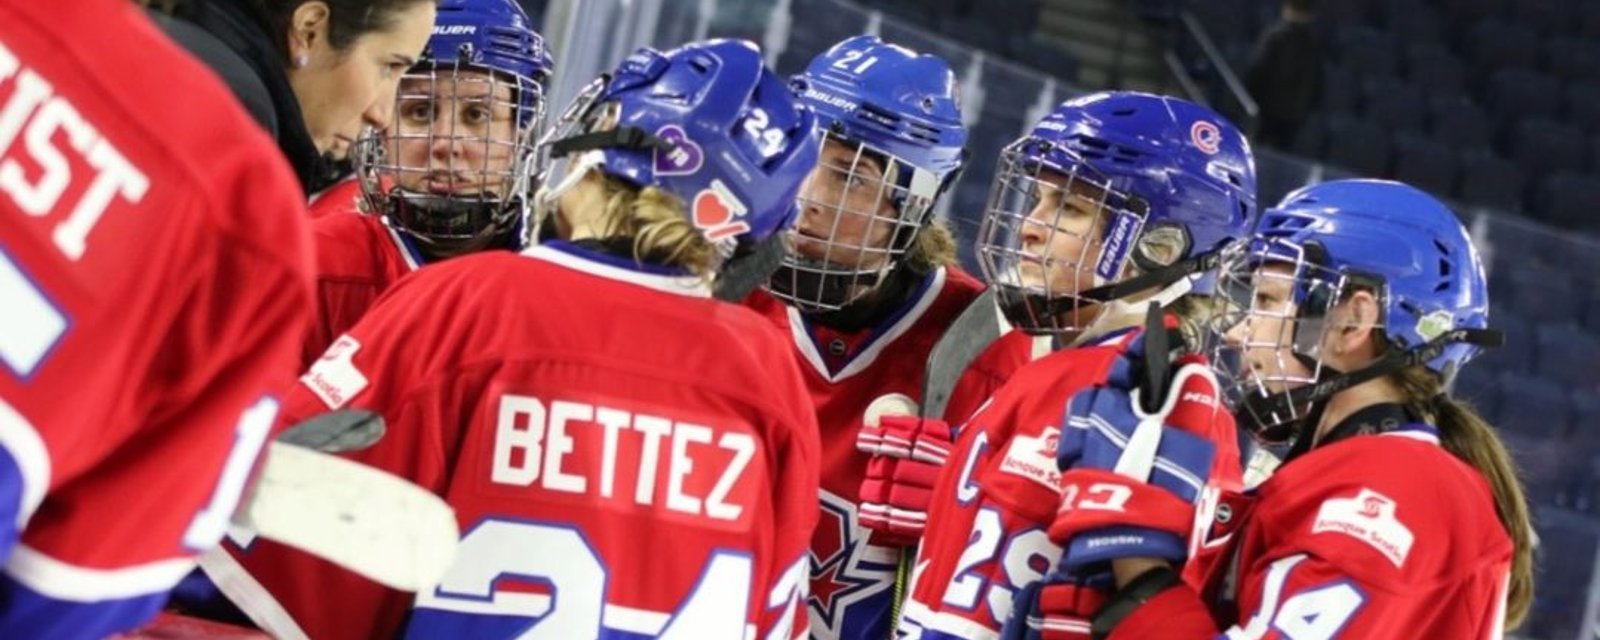 Les Canadiennes get skates and car stolen on playoff night! 